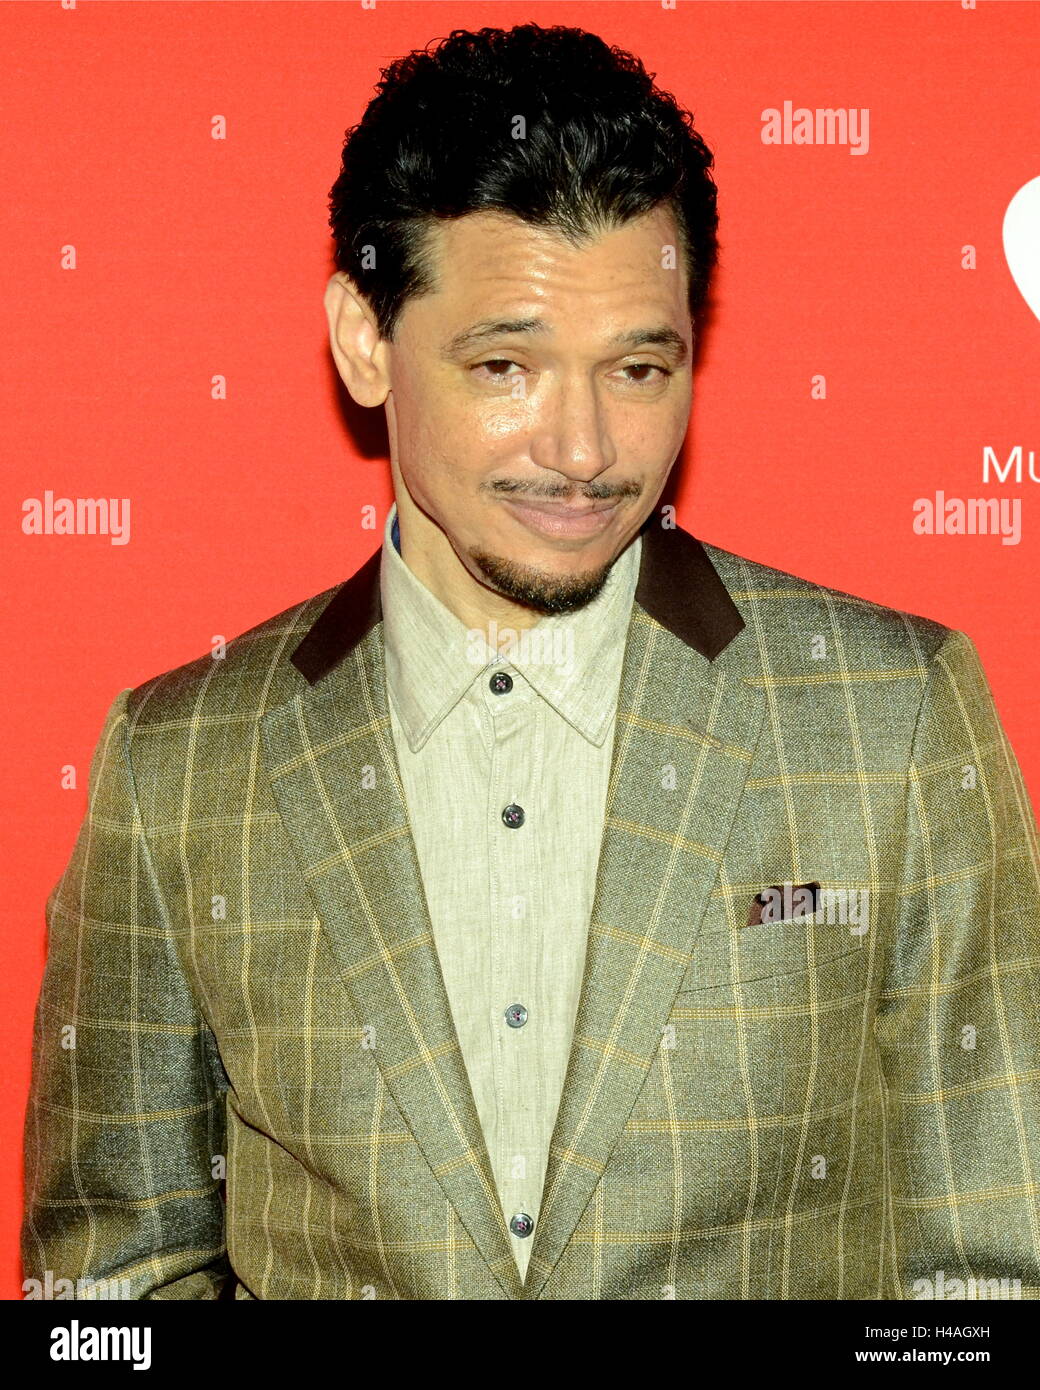 El DeBarge arrives for the 12th Annual MusiCares MAP Fund Tribute Concert at The Novo by Microsoft on May 19, 2016 in Los Angeles, California. Stock Photo